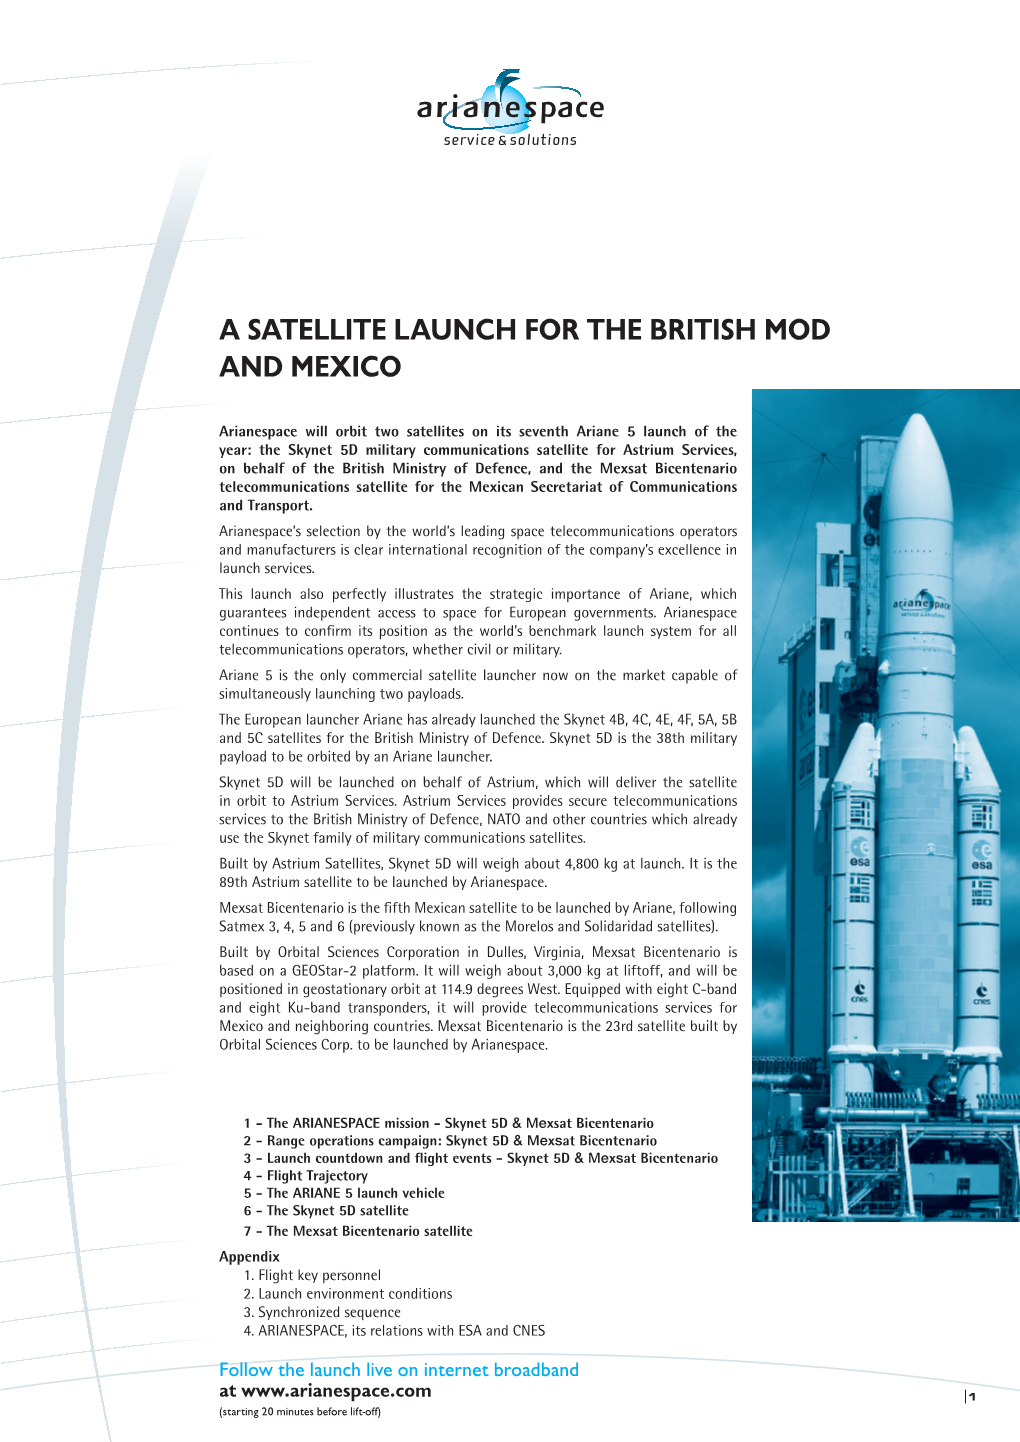 A Satellite Launch for the British Mod and Mexico